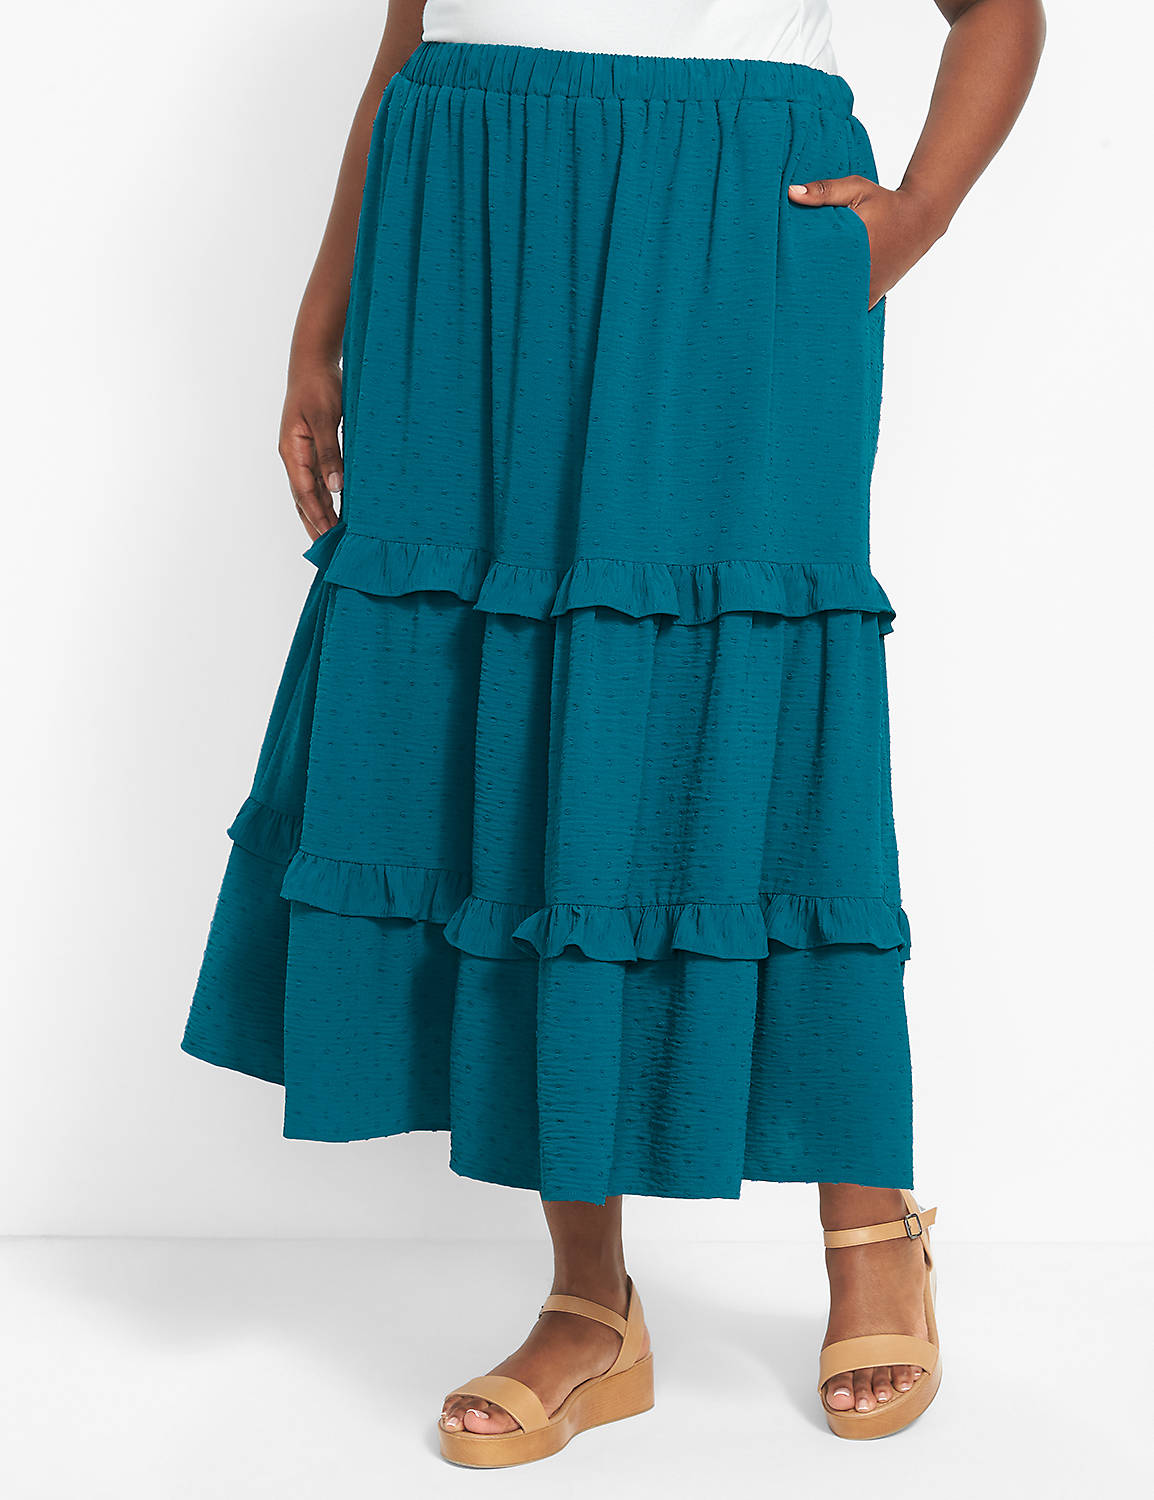 Pull On Tiered Maxi Skirt (Matchbac Product Image 4